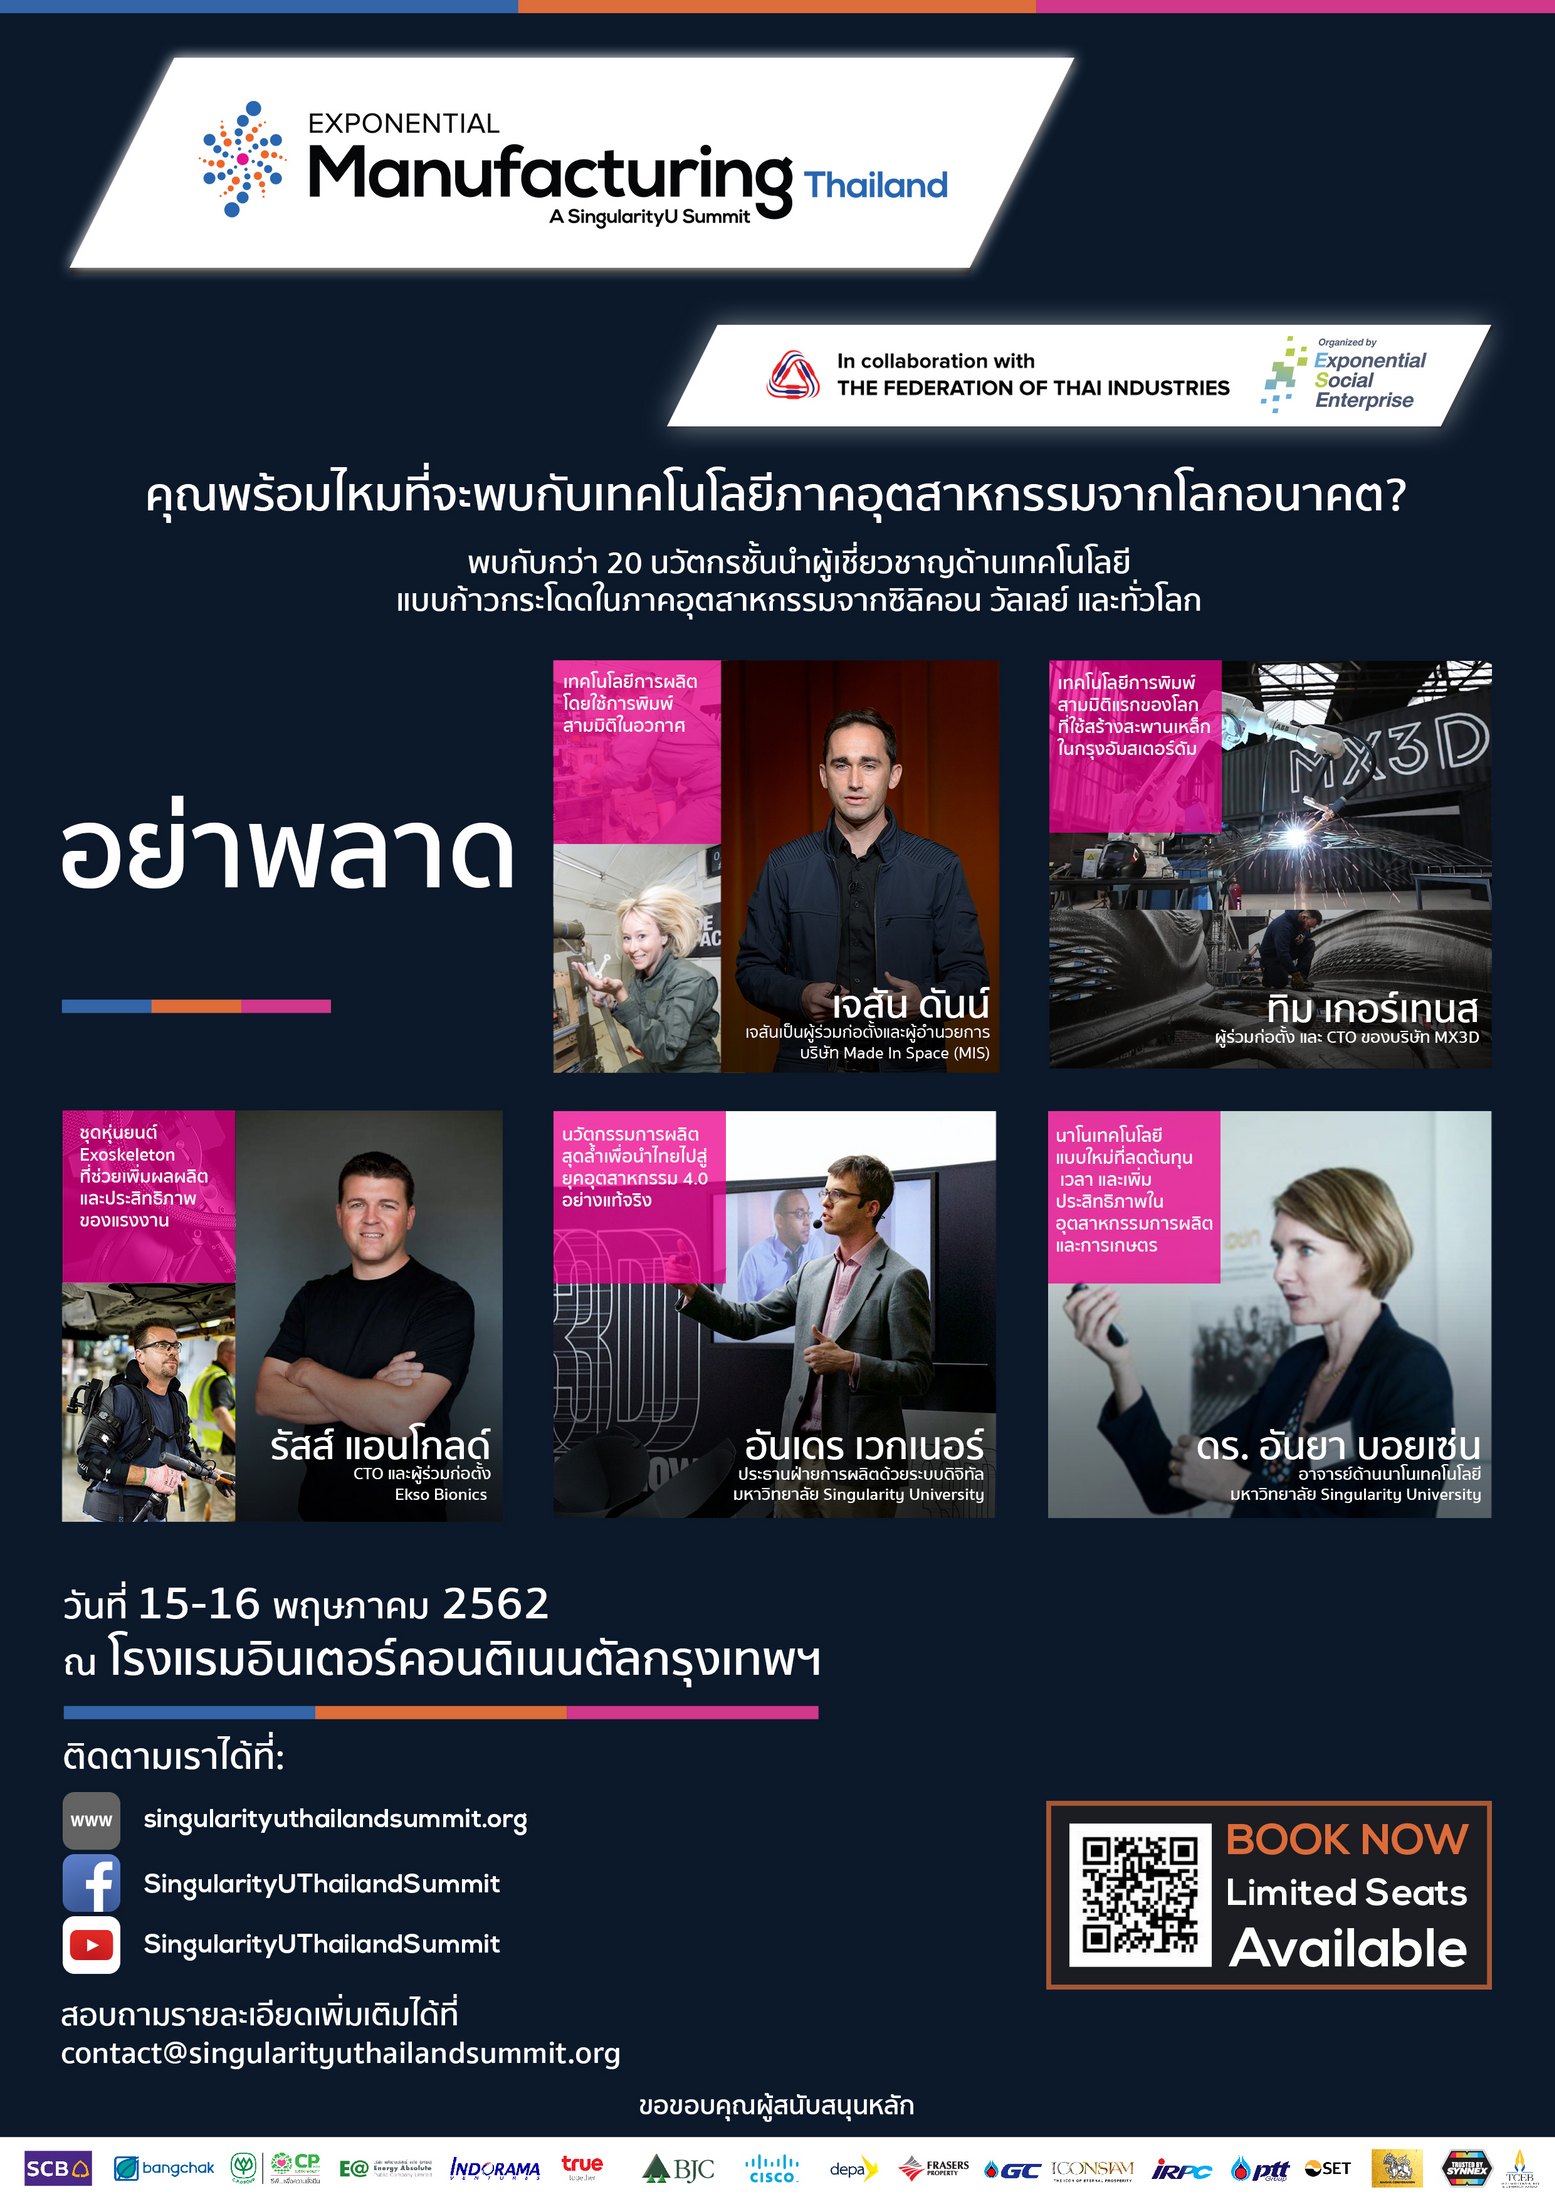 Exponential Manufacturing Thailand 2019